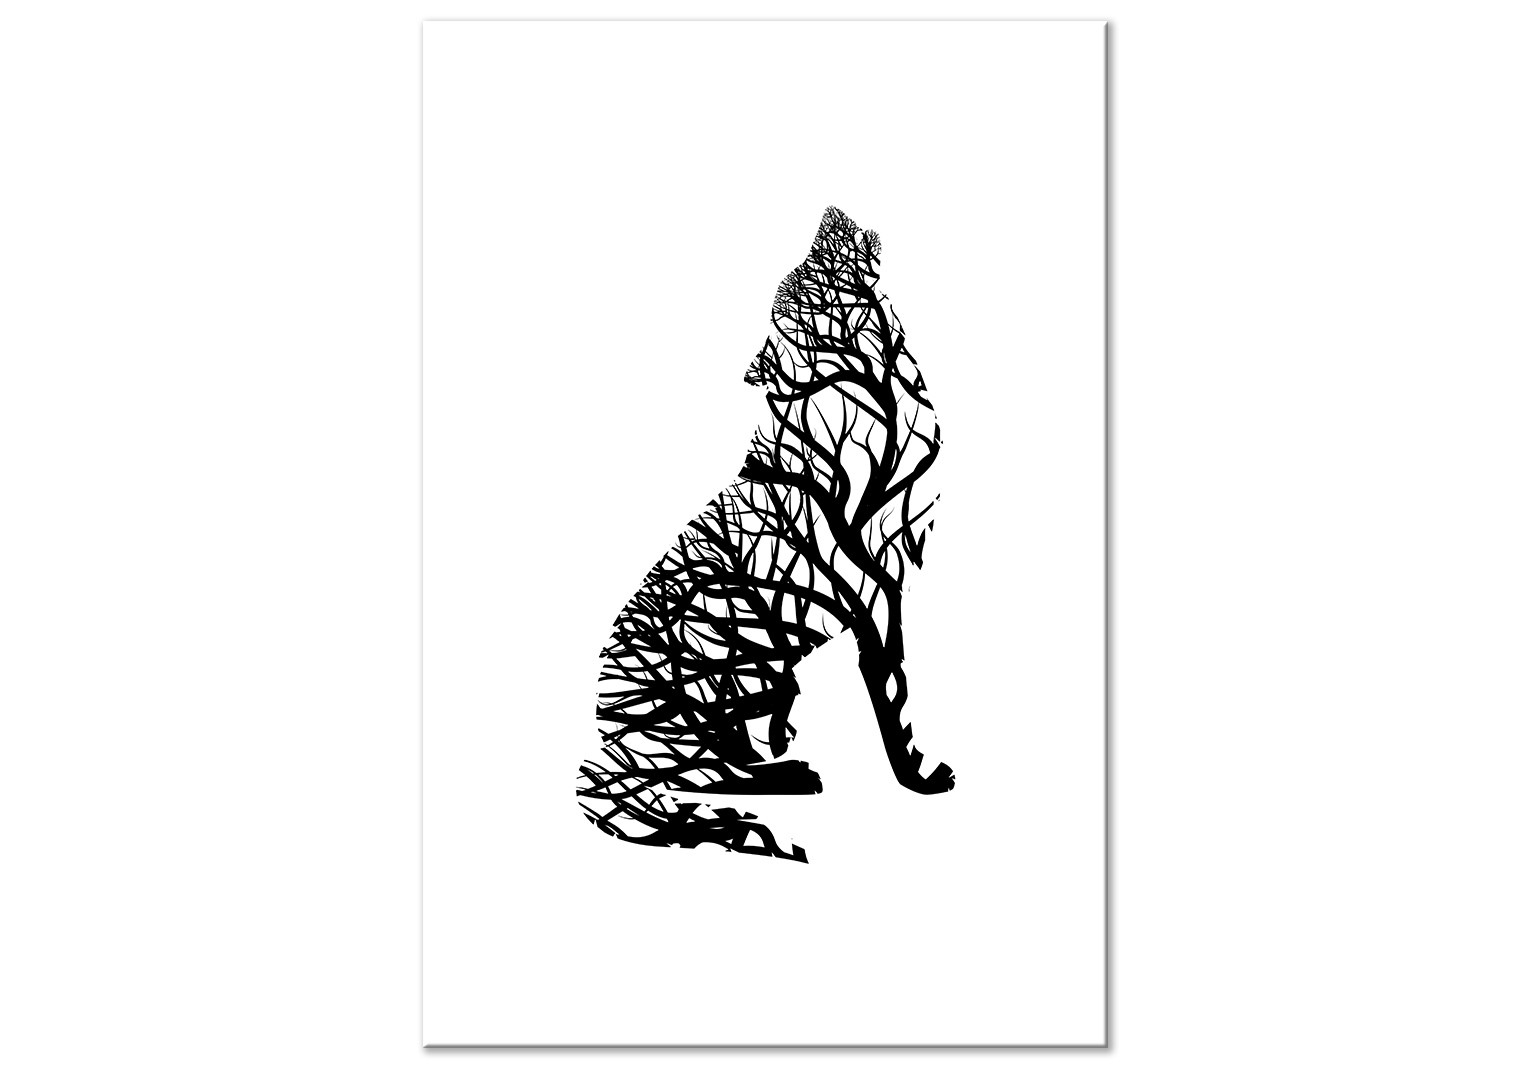 black and white wolf outline